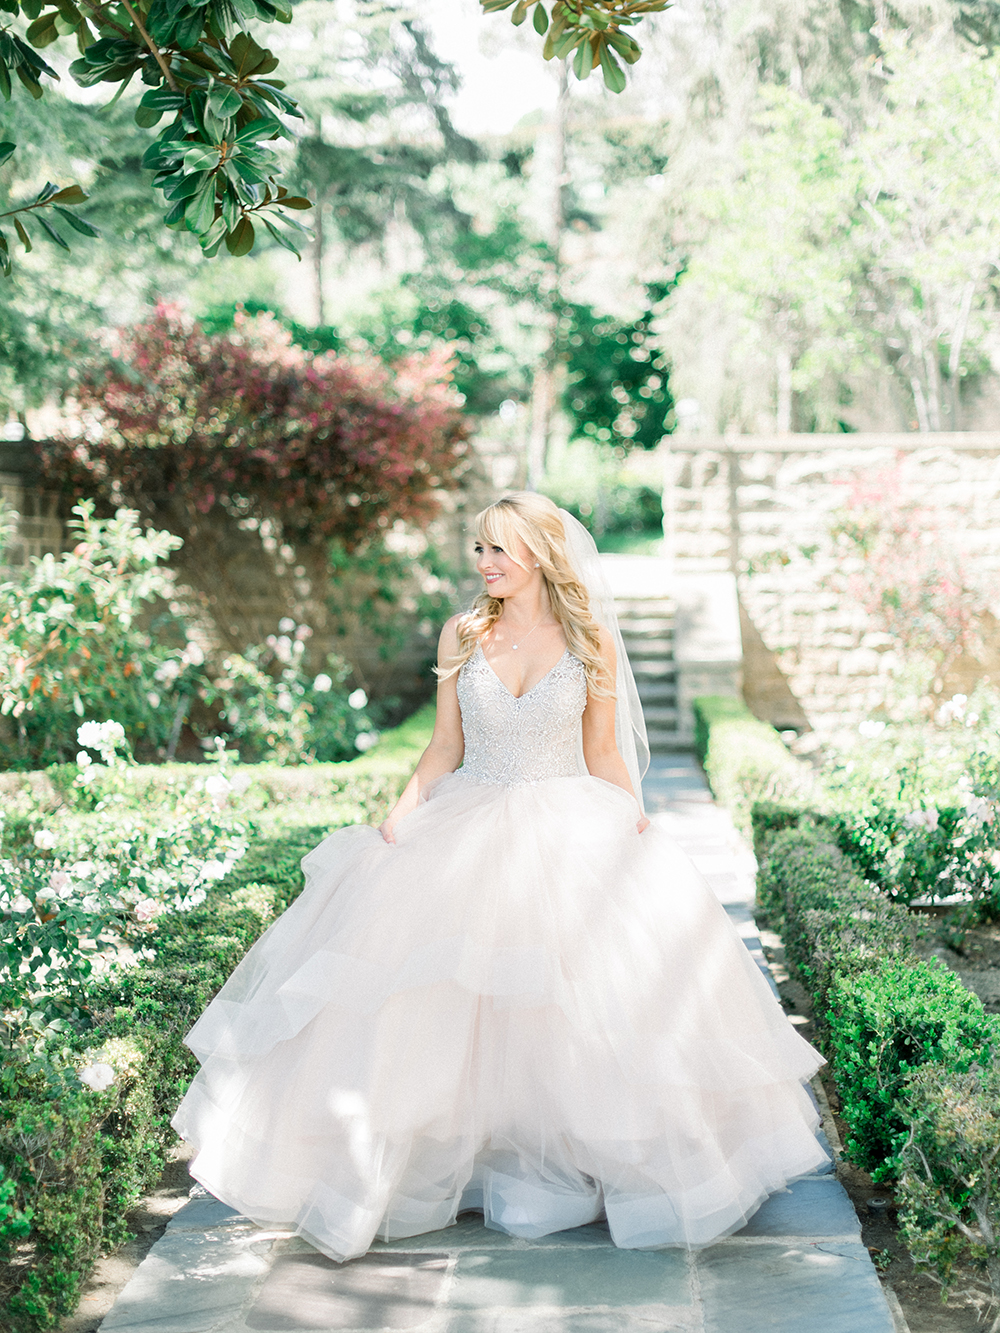 Romantic and Classic Greystone Mansion Wedding by Lucky Day Events Co. x Jordan Galindo Photography // Hayley Paige Wedding Dress